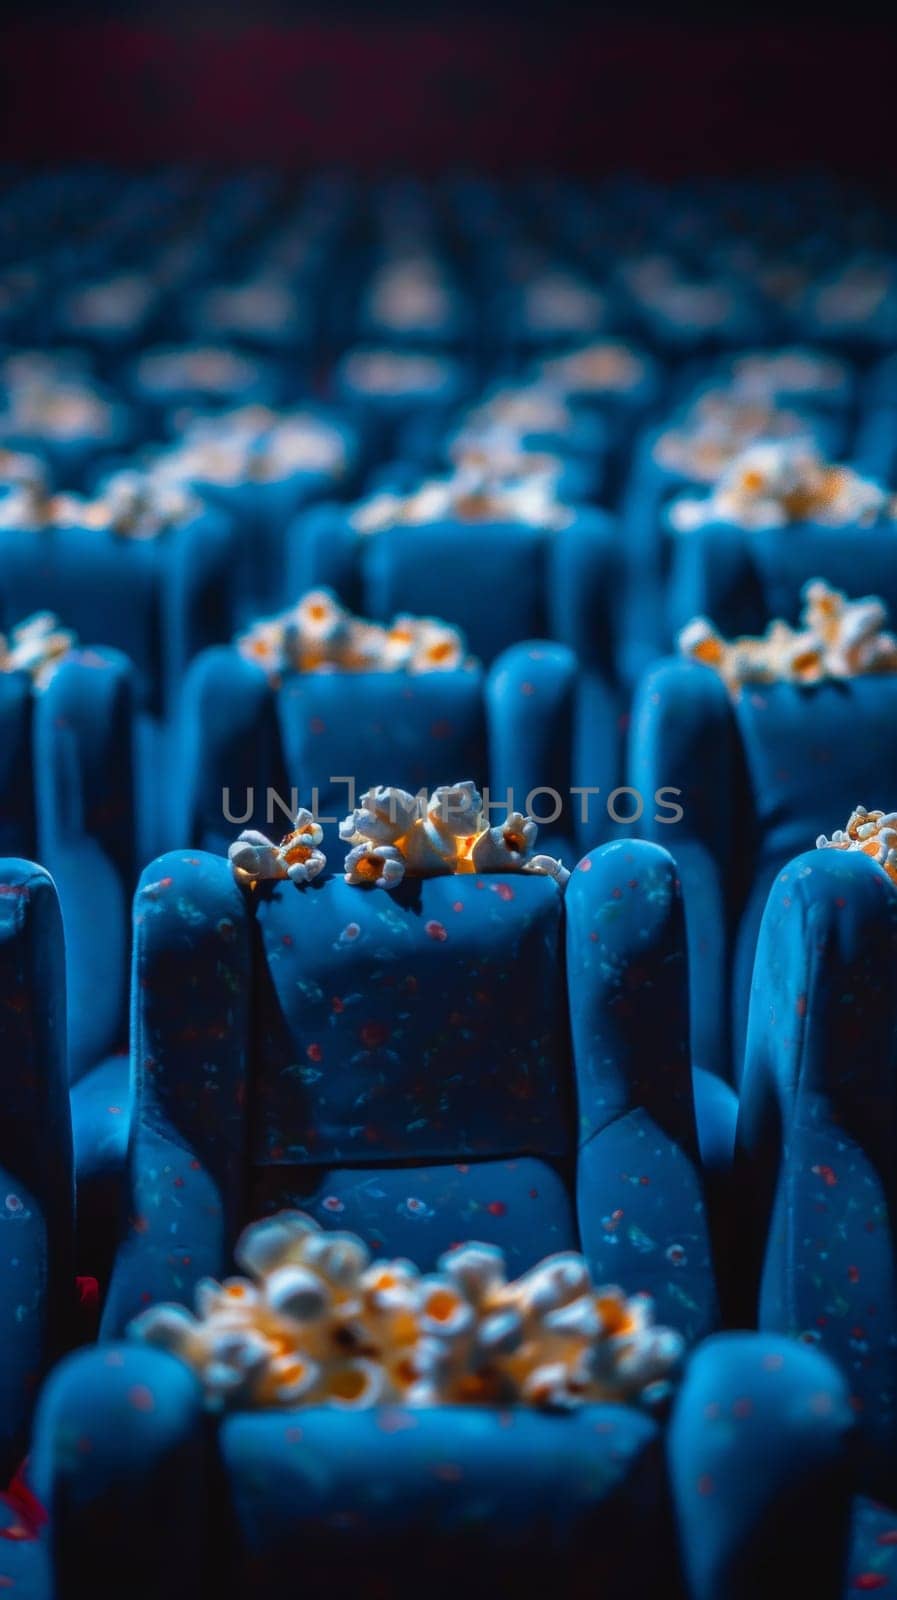 A row of blue chairs with popcorn on them and a wall behind